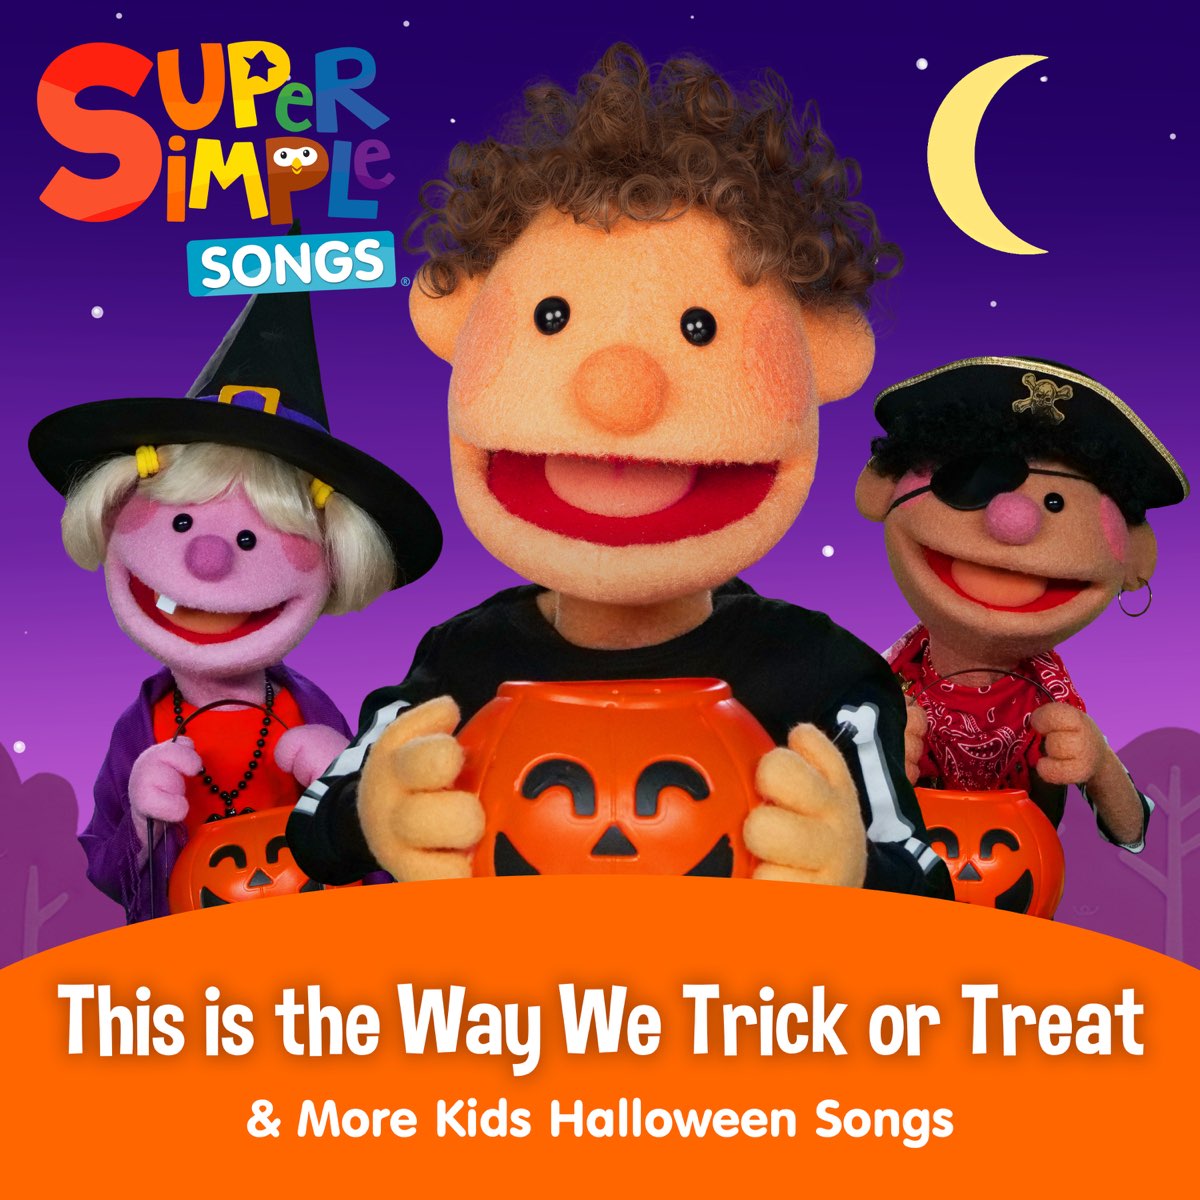 This is the Way We Trick or Treat & More Kids Halloween Songs by Super  Simple Songs on Apple Music